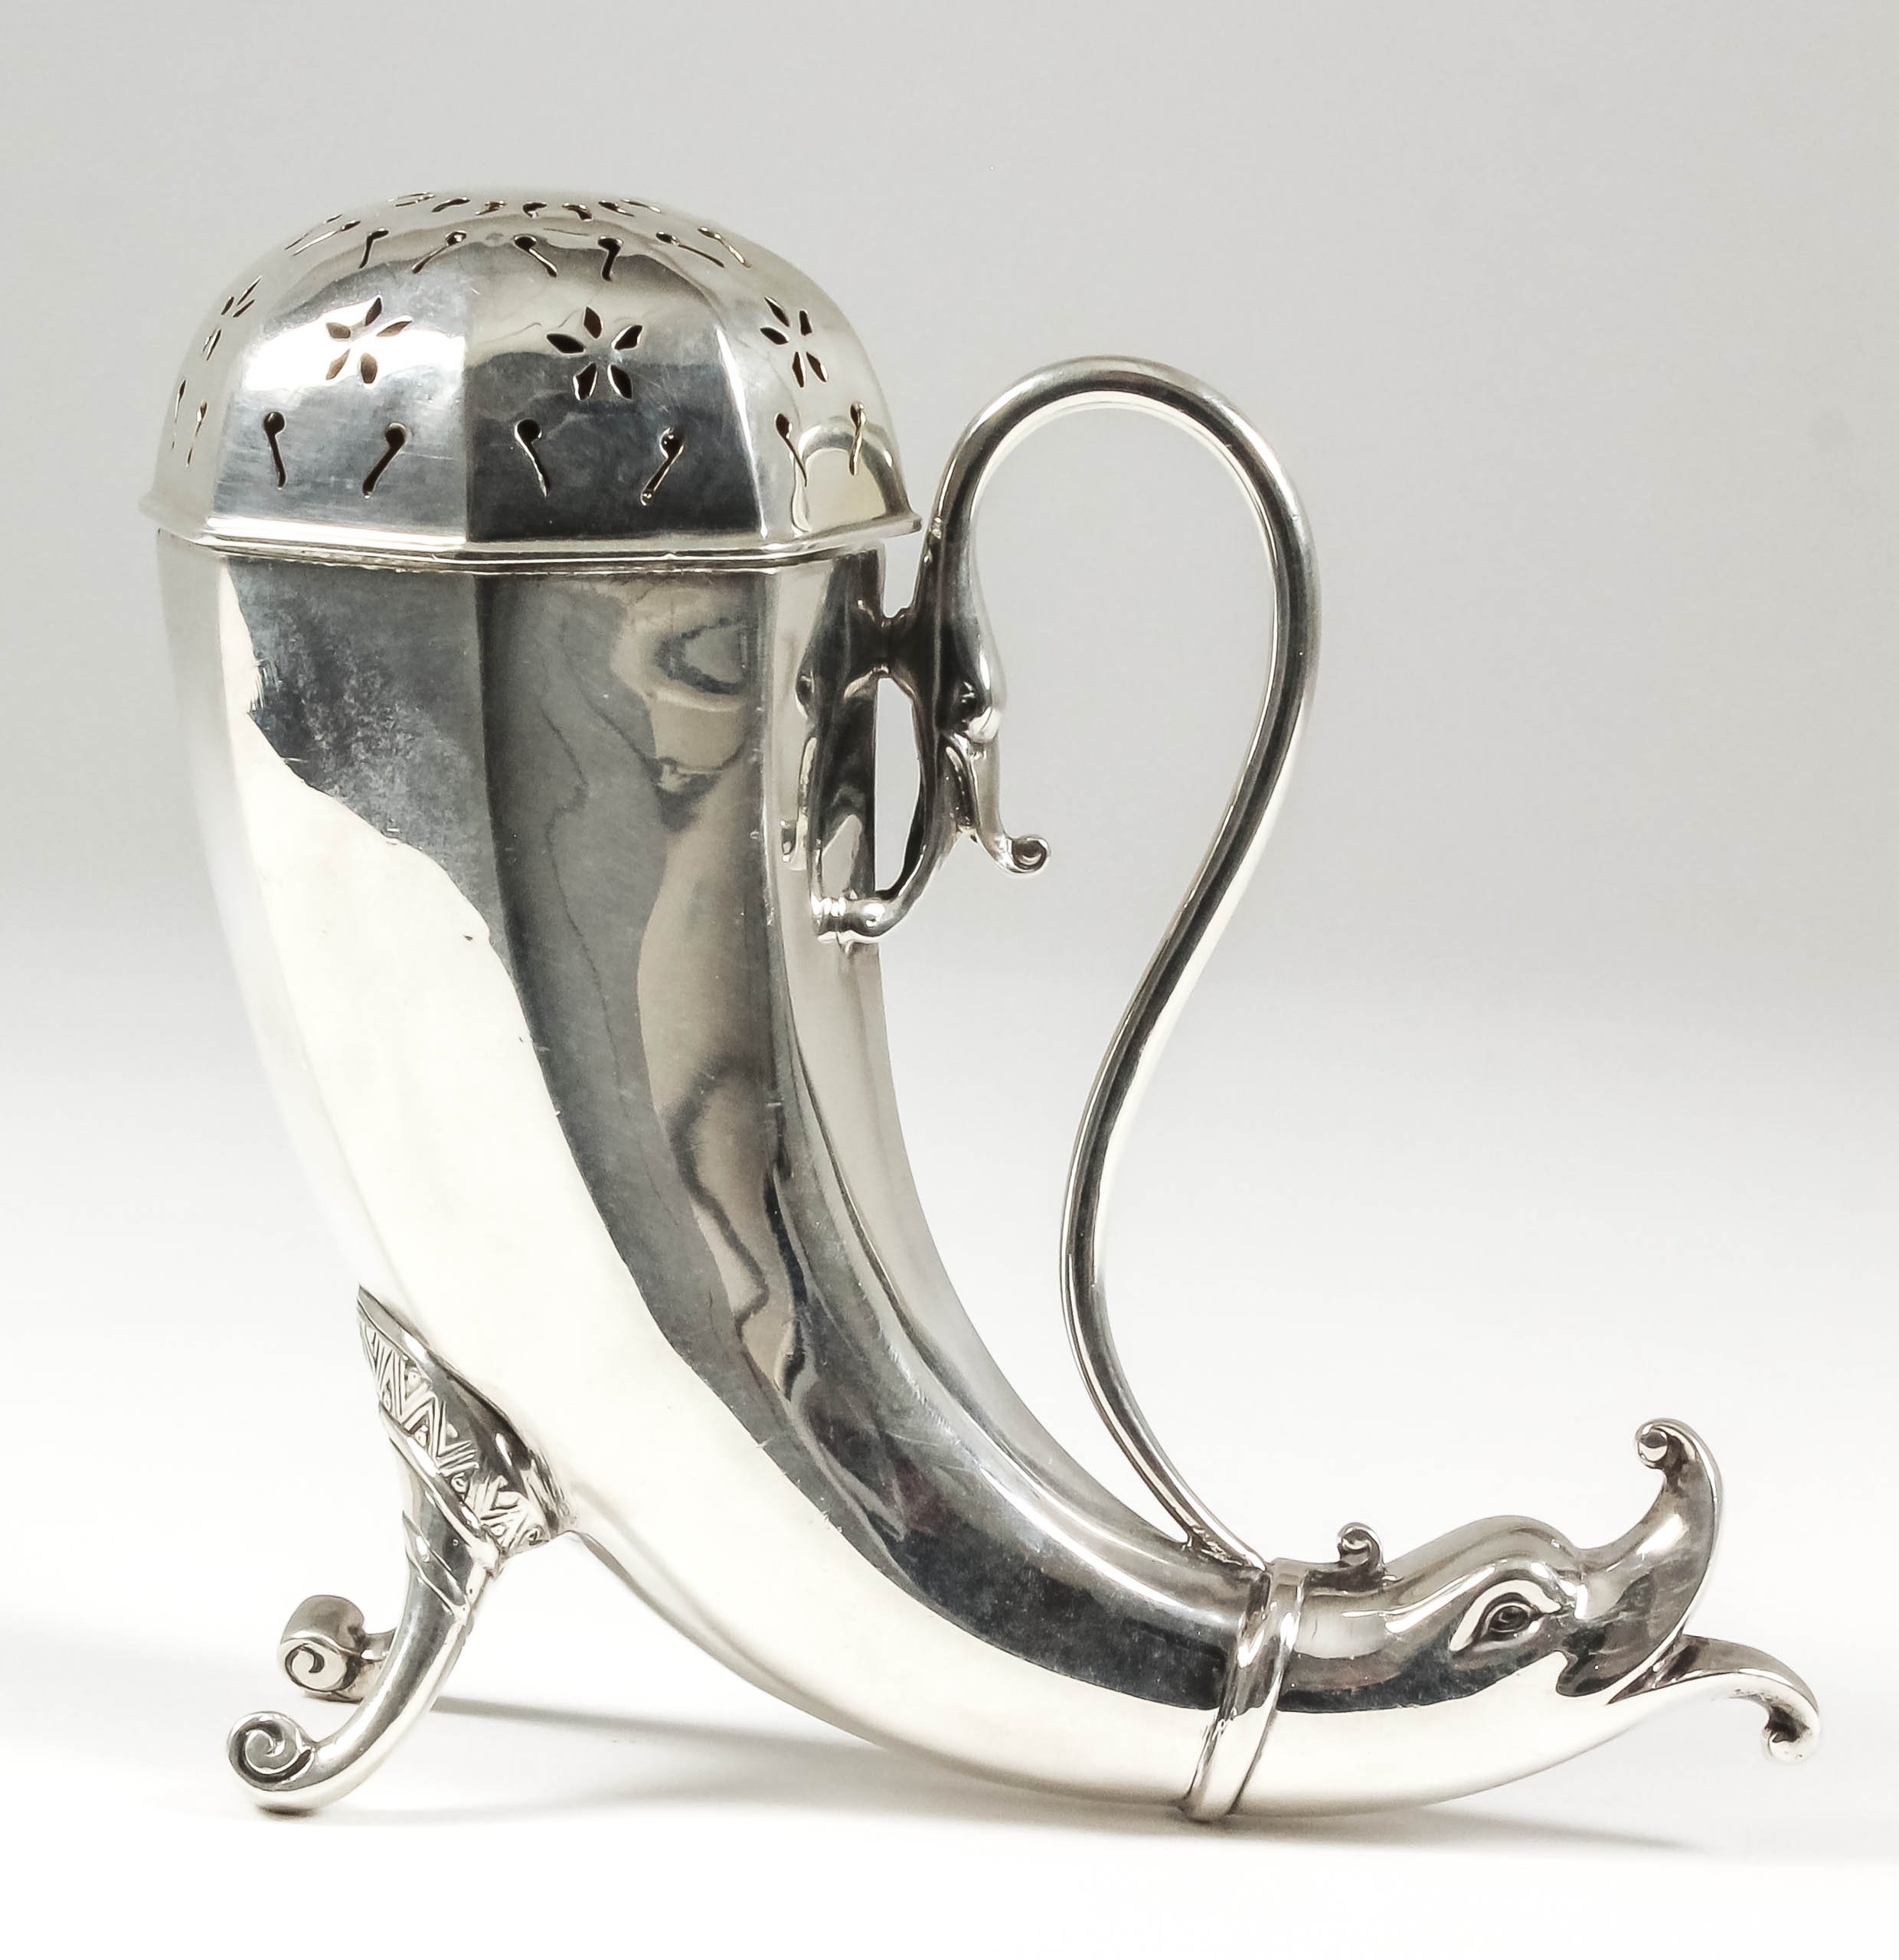 A George V Silver Horn Pattern Sugar Caster in the Celtic Manner, Birmingham 1930, with import marks